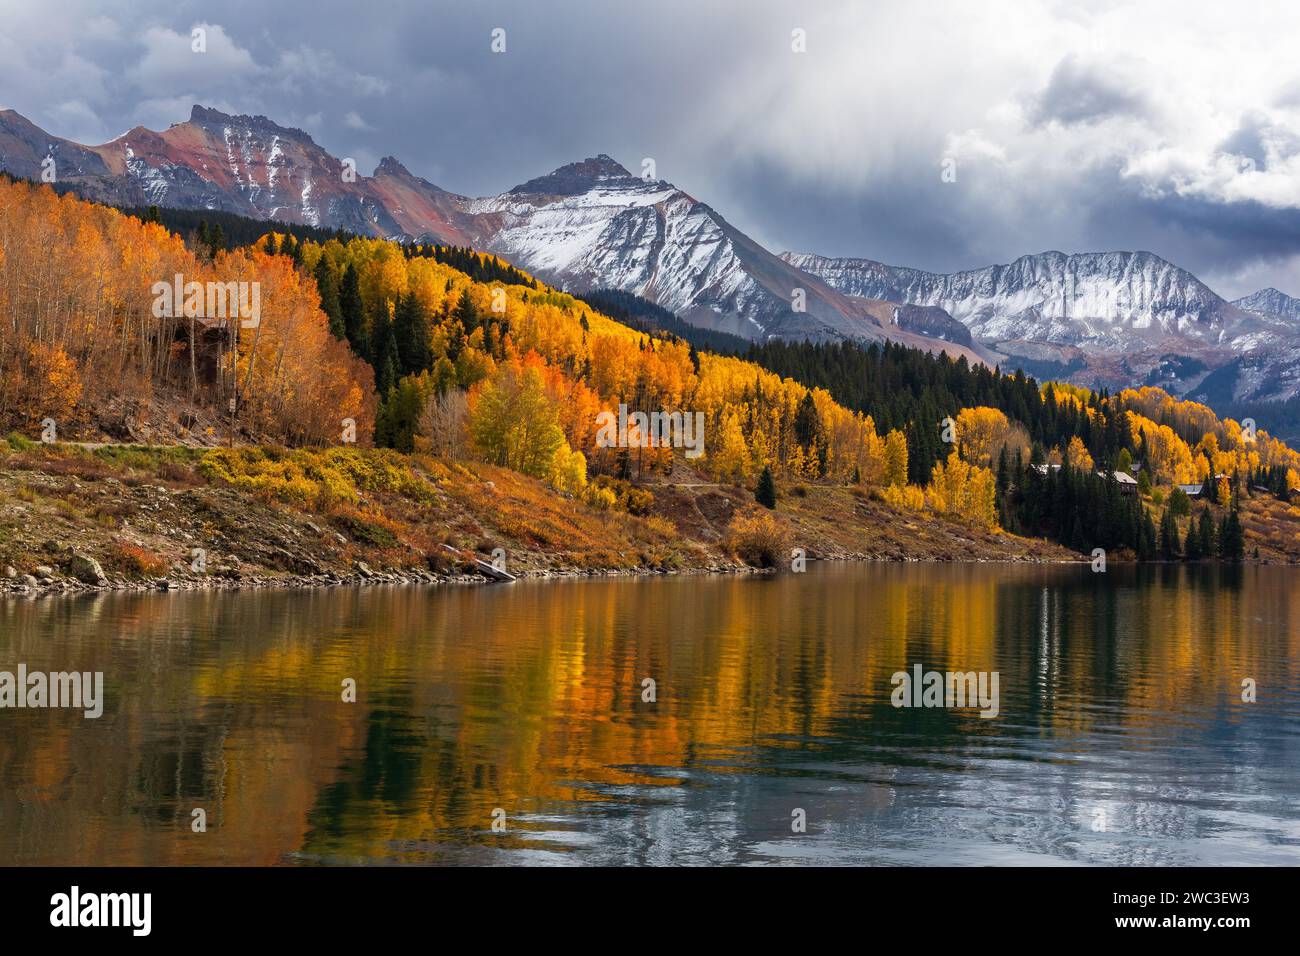 Autumn landscape with Aspen trees at Trout Lake in the San Juan Mountains, Colorado Stock Photo